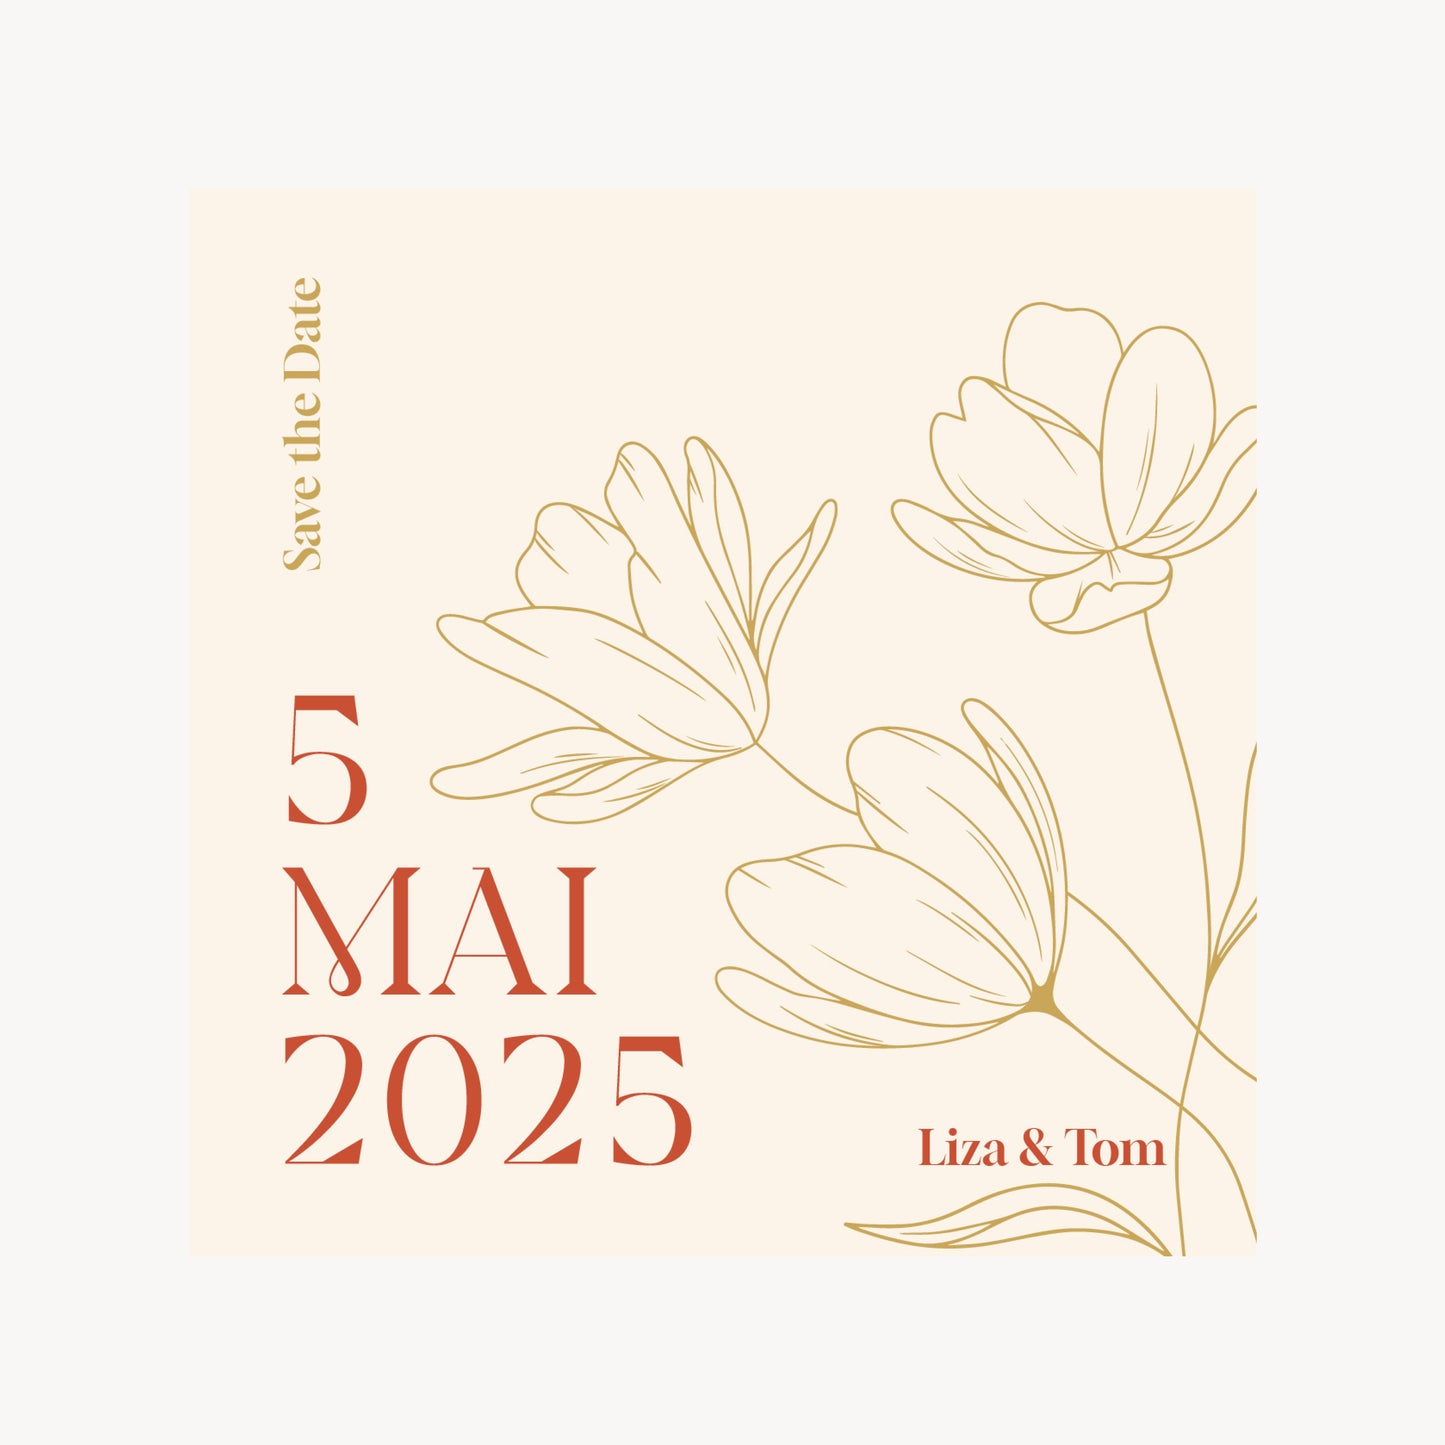 SAVE THE DATE - FLORA